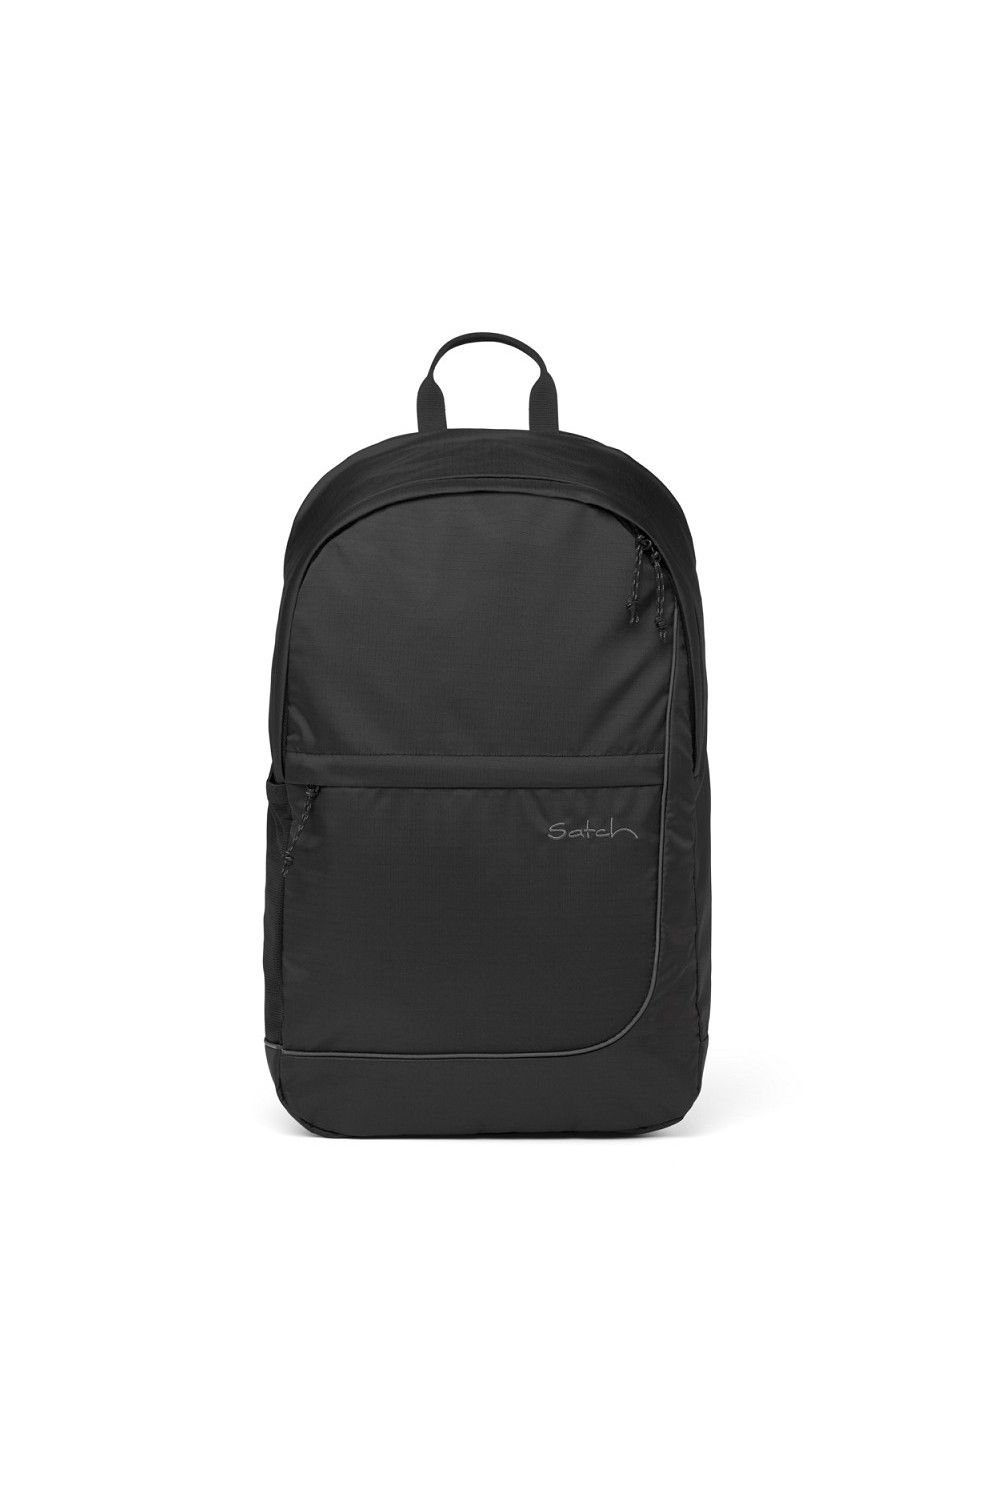 Satch Backpack Fly Ripstop Black